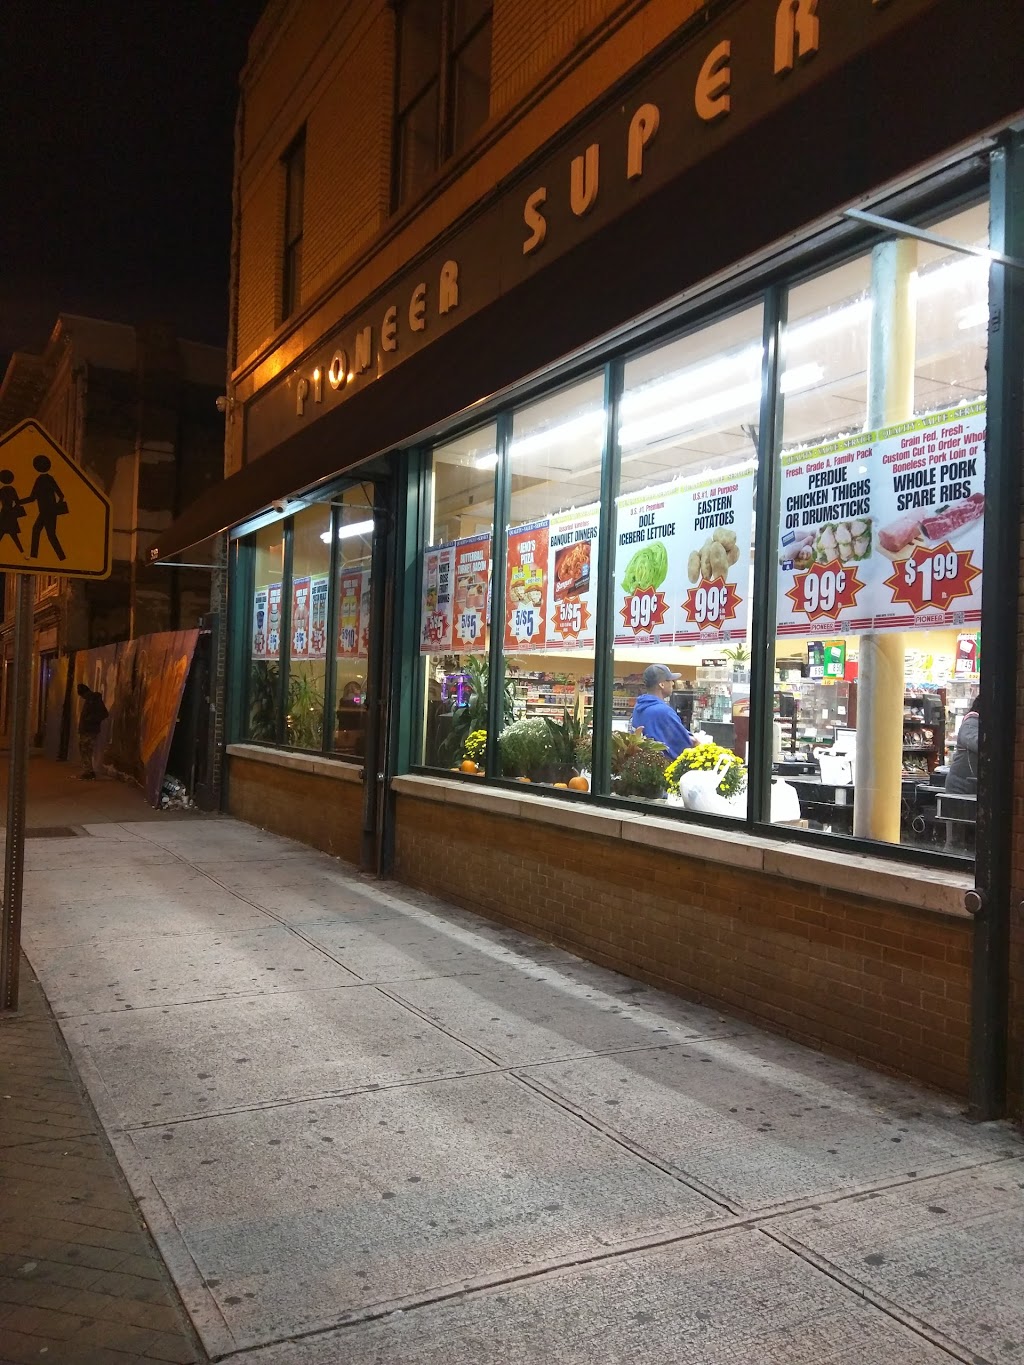 Pioneer Supermarkets of Jersey City | 320 Martin Luther King Dr, Jersey City, NJ 07305 | Phone: (201) 432-3929